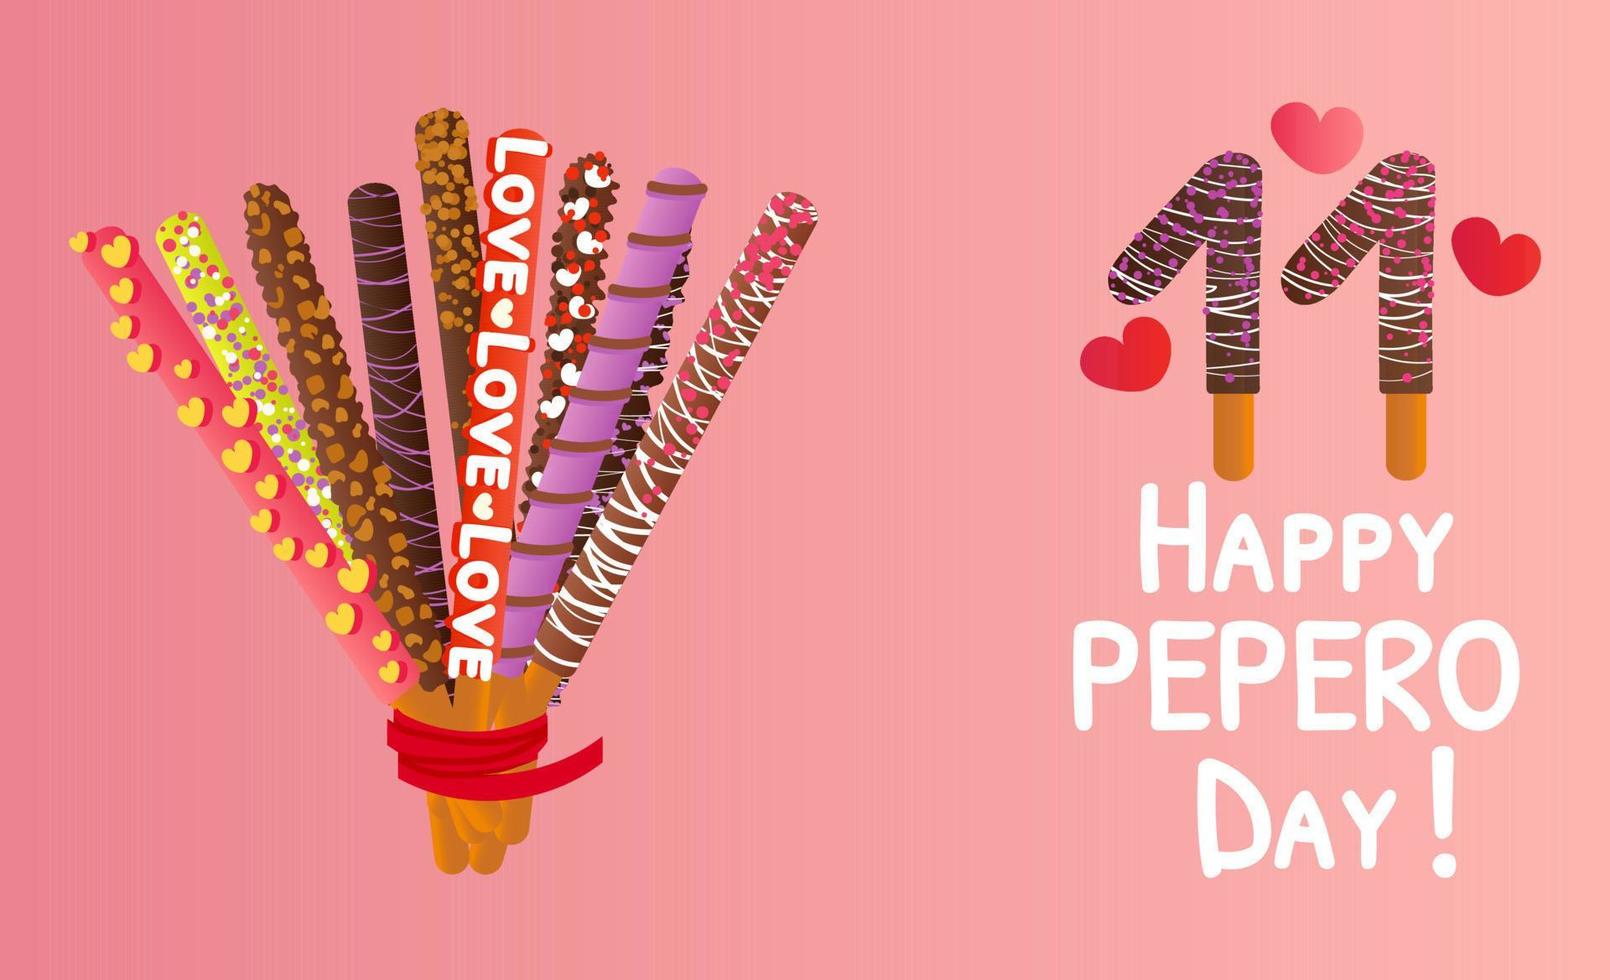 Happy pepero day background vector illustration on pink